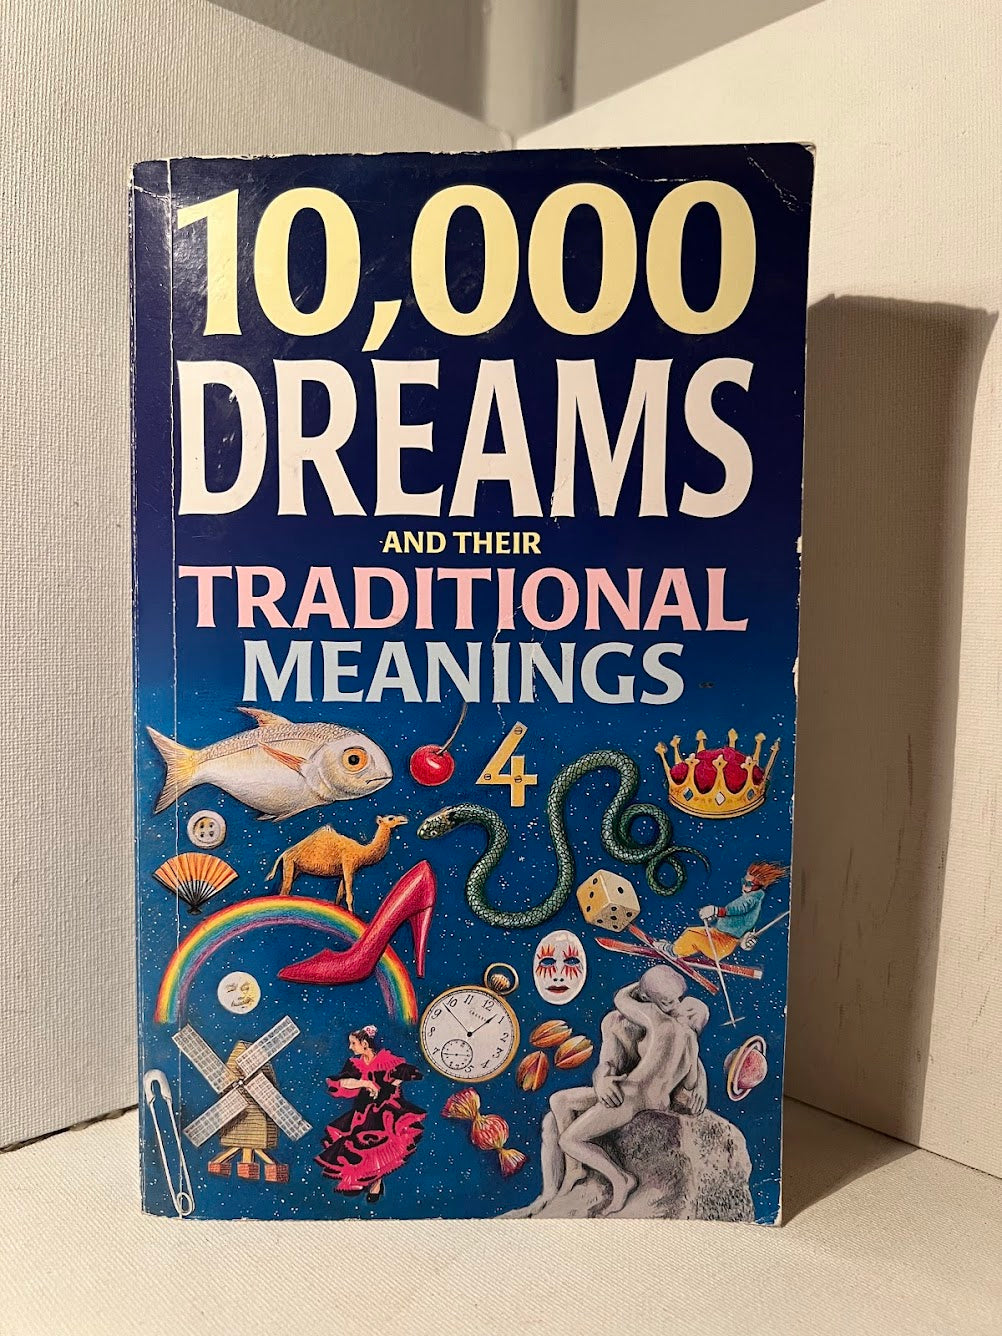 10,000 Dreams and their Traditional Meanings